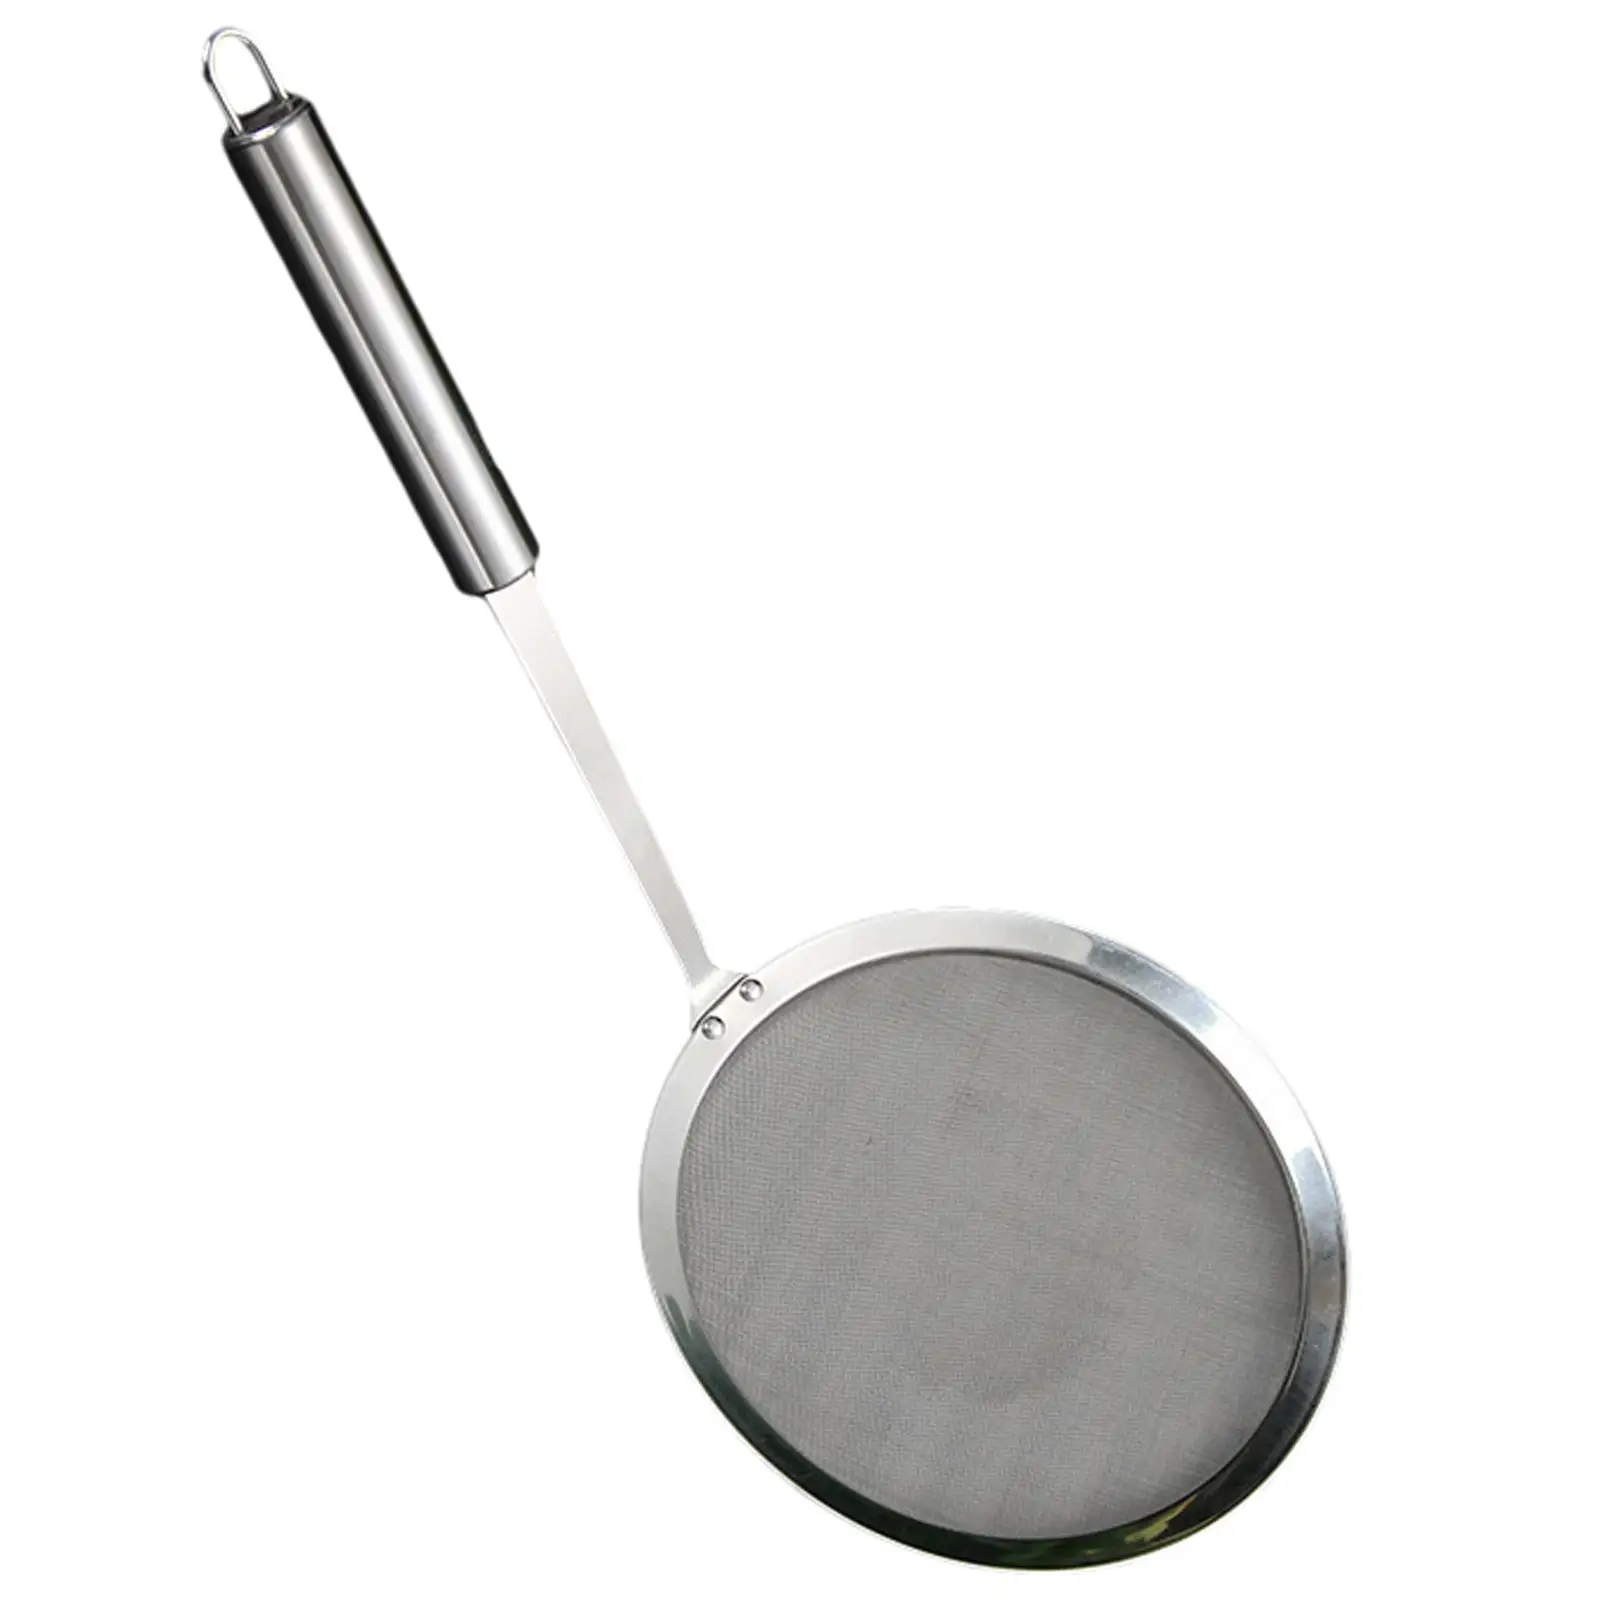 Stainless Steel Skimmer Spoon Kitchen Cooking Tool Fine Mesh Food Strainer Oil Filter for Grease Cooking Frying Gravy Baking